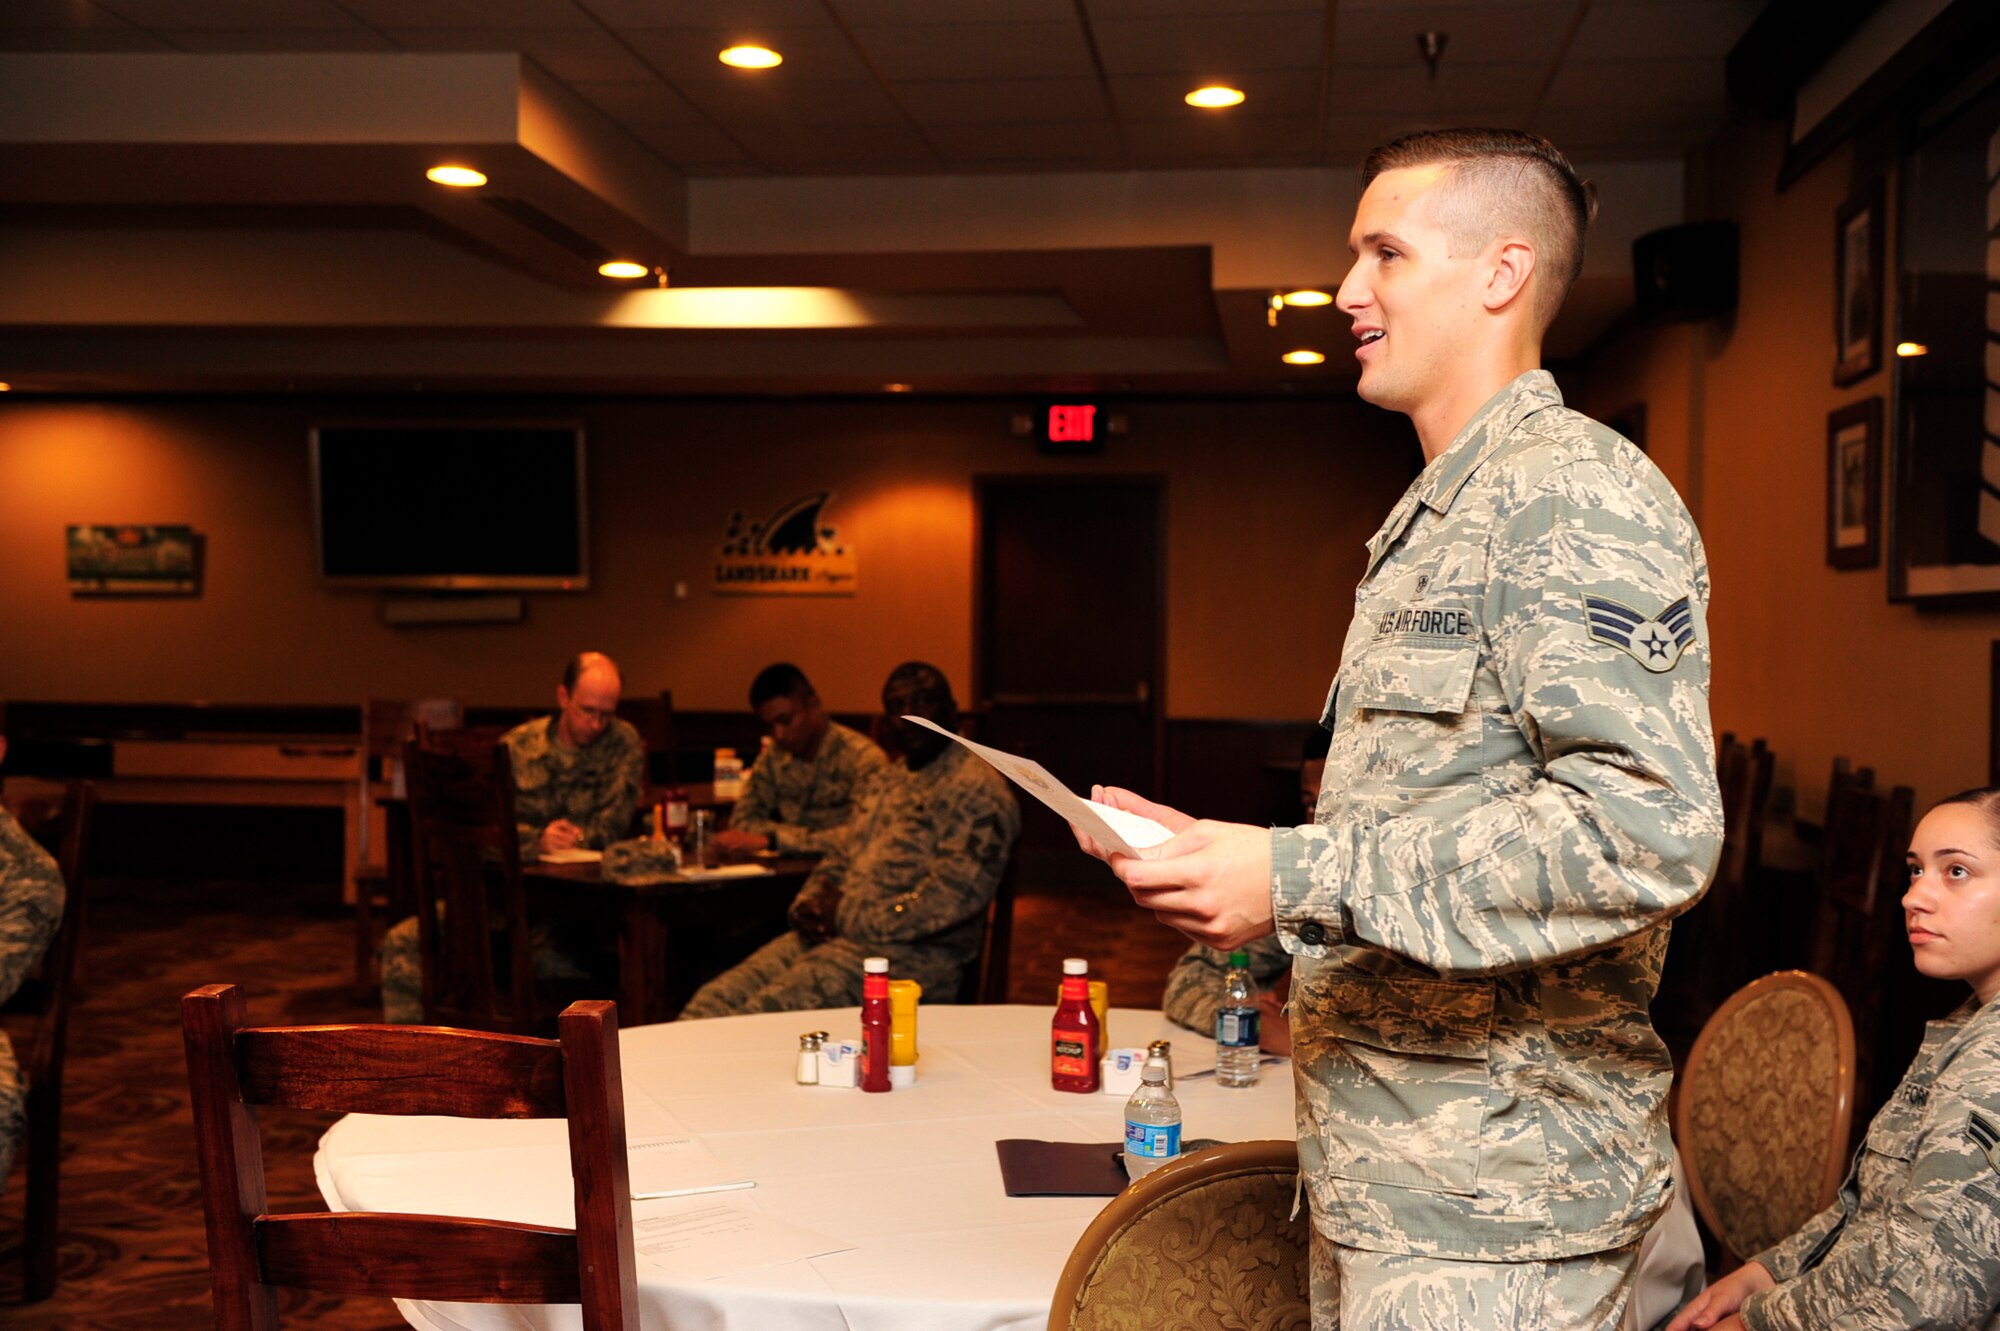 Senior Airman Dylan Vogel, 56th Medical Operations Squadron Family Health medical technician and the Luke Empowering Airmen’s Development Council president, goes over the latest upcoming events during a LEAD Council meeting Sept. 16, 2015 at Luke Air Force Base, Ariz. Club Five Six. The LEAD Council has various programs available to help Airmen succeed, from the shadowing program to the scholarships provided and more. (U.S. Air Force photo by Senior Airman Grace Lee)